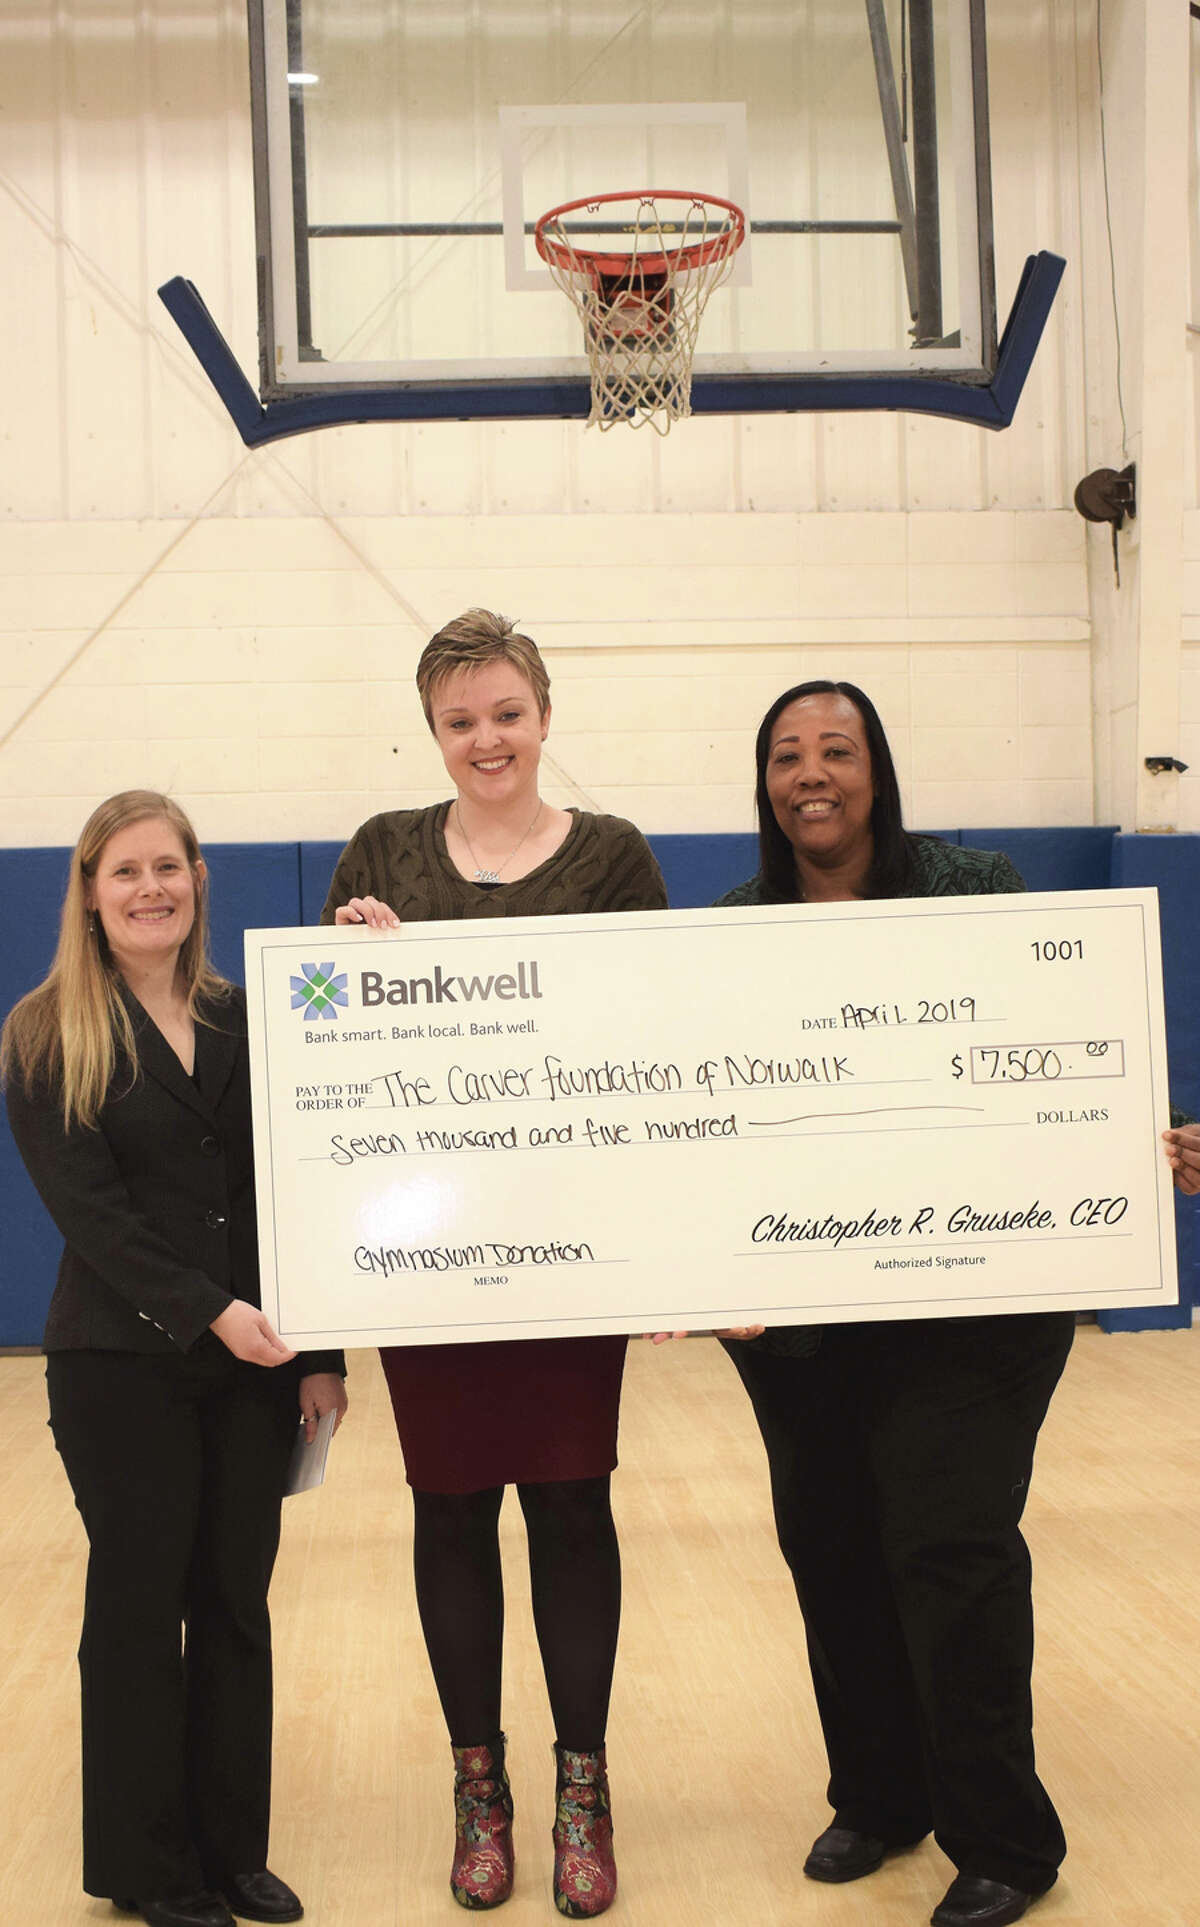 Nikki LaFaye, director of philanthropy at The Carver Foundation of Norwalk, Lucy French, assistant vice president and marketing manager at Bankwell, and Novelette Peterkin, CEO of the Carver Foundation of Norwalk, announce a $5,000 donation toward a gym expansion that will allow basketball programs to grow. Bankwell / Contributed photo